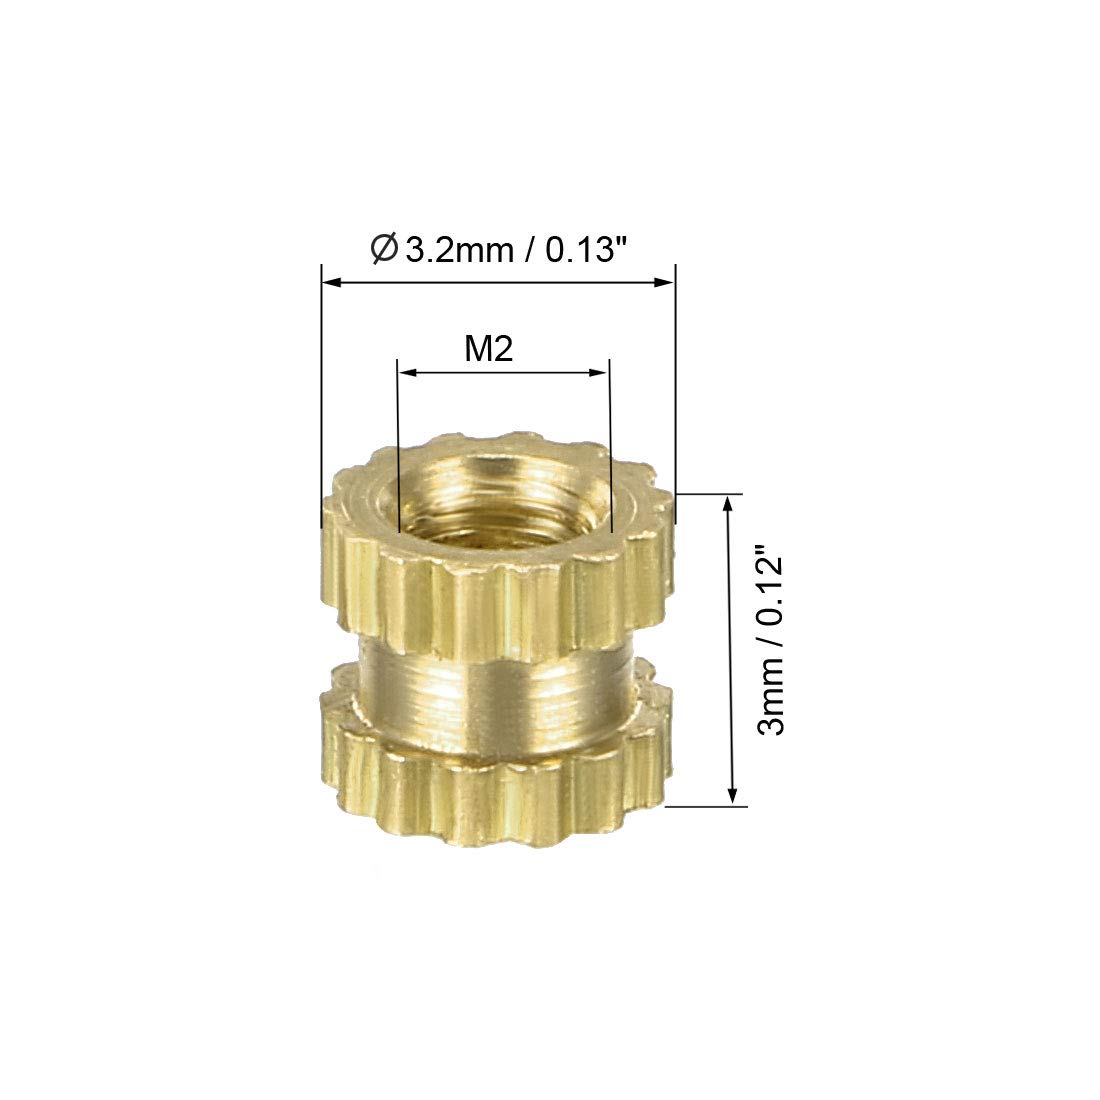 uxcell Knurled Insert Nuts - 50Pcs M3 x 4mm Length x 5mm OD Female Thread  Brass Threaded Insert Embedment Nut for 3D Printer